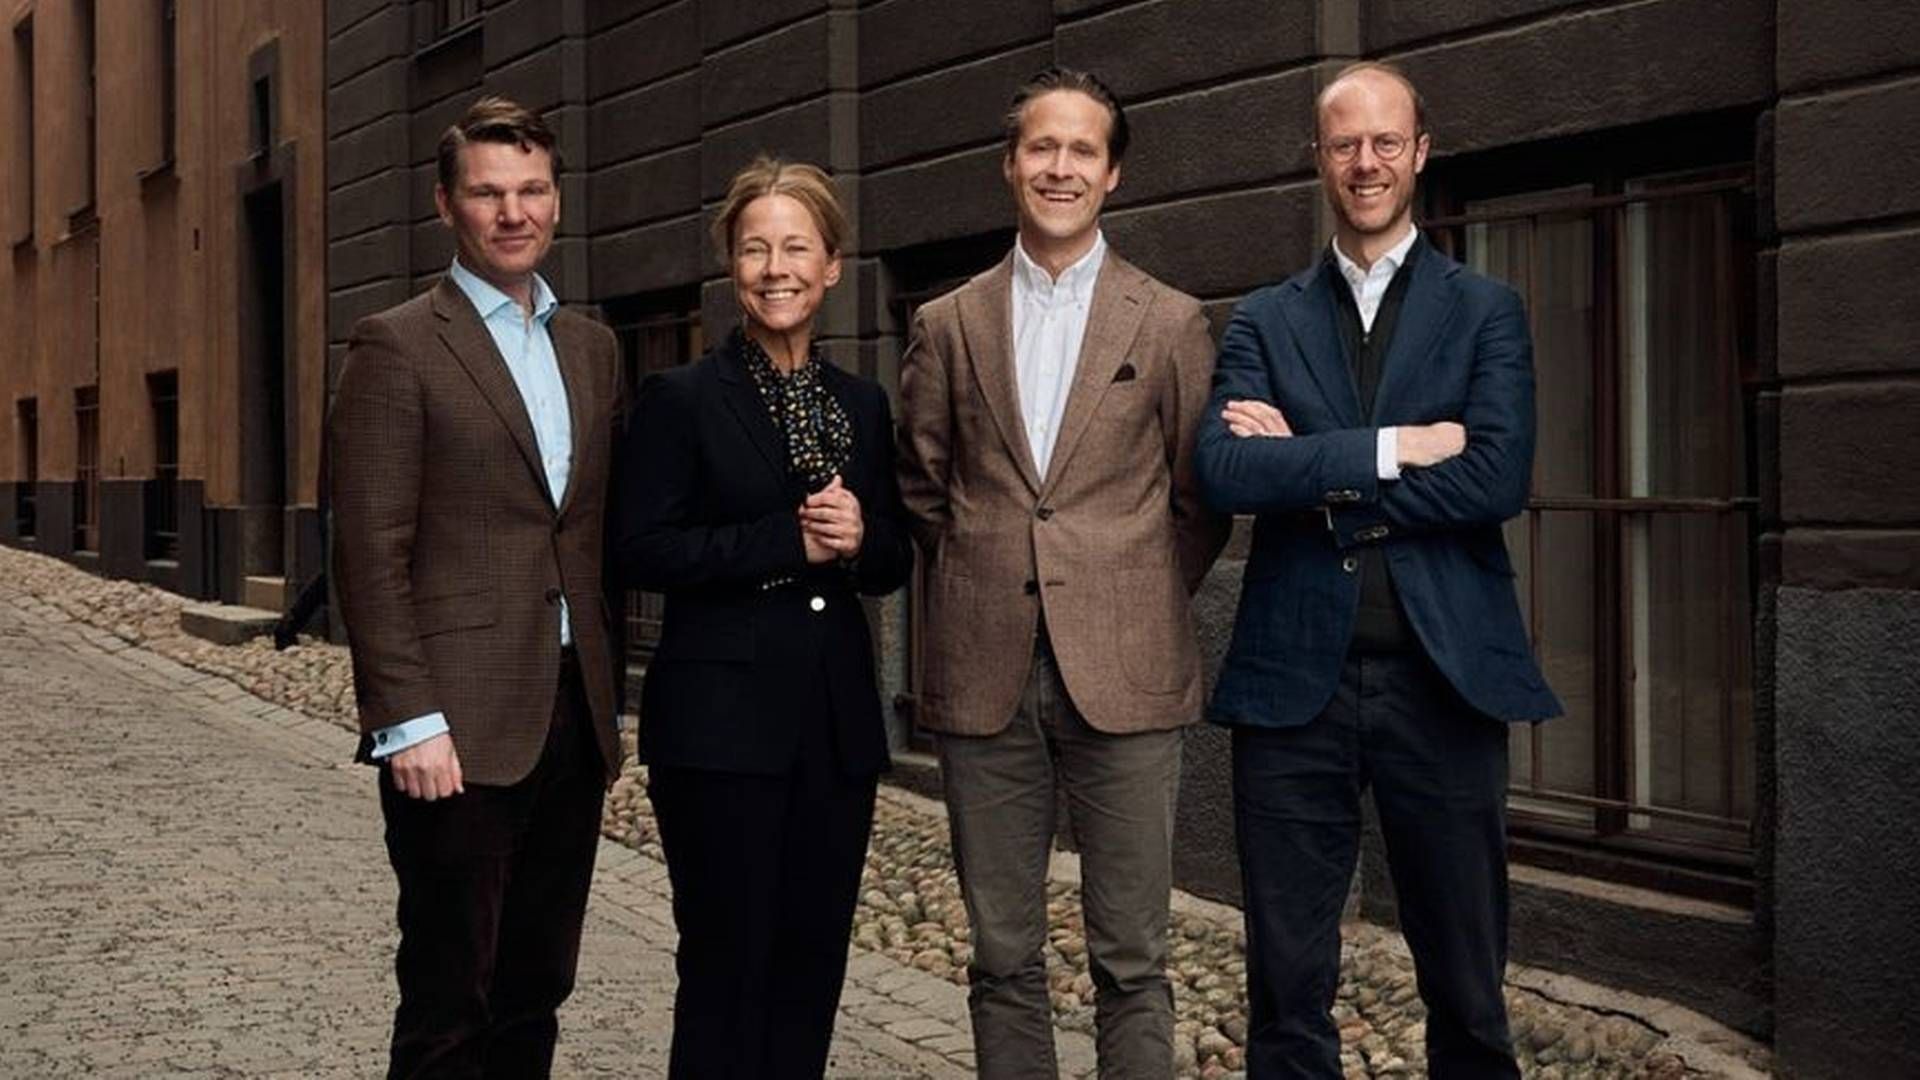 Key figures in the investment firm are NCP founder Jakob Eliasson (far left), chair Jenny Penser, and Altaal co-founders Henrik Schmidt and Stefan Gattberg (far right). | Photo: Altaal / PR